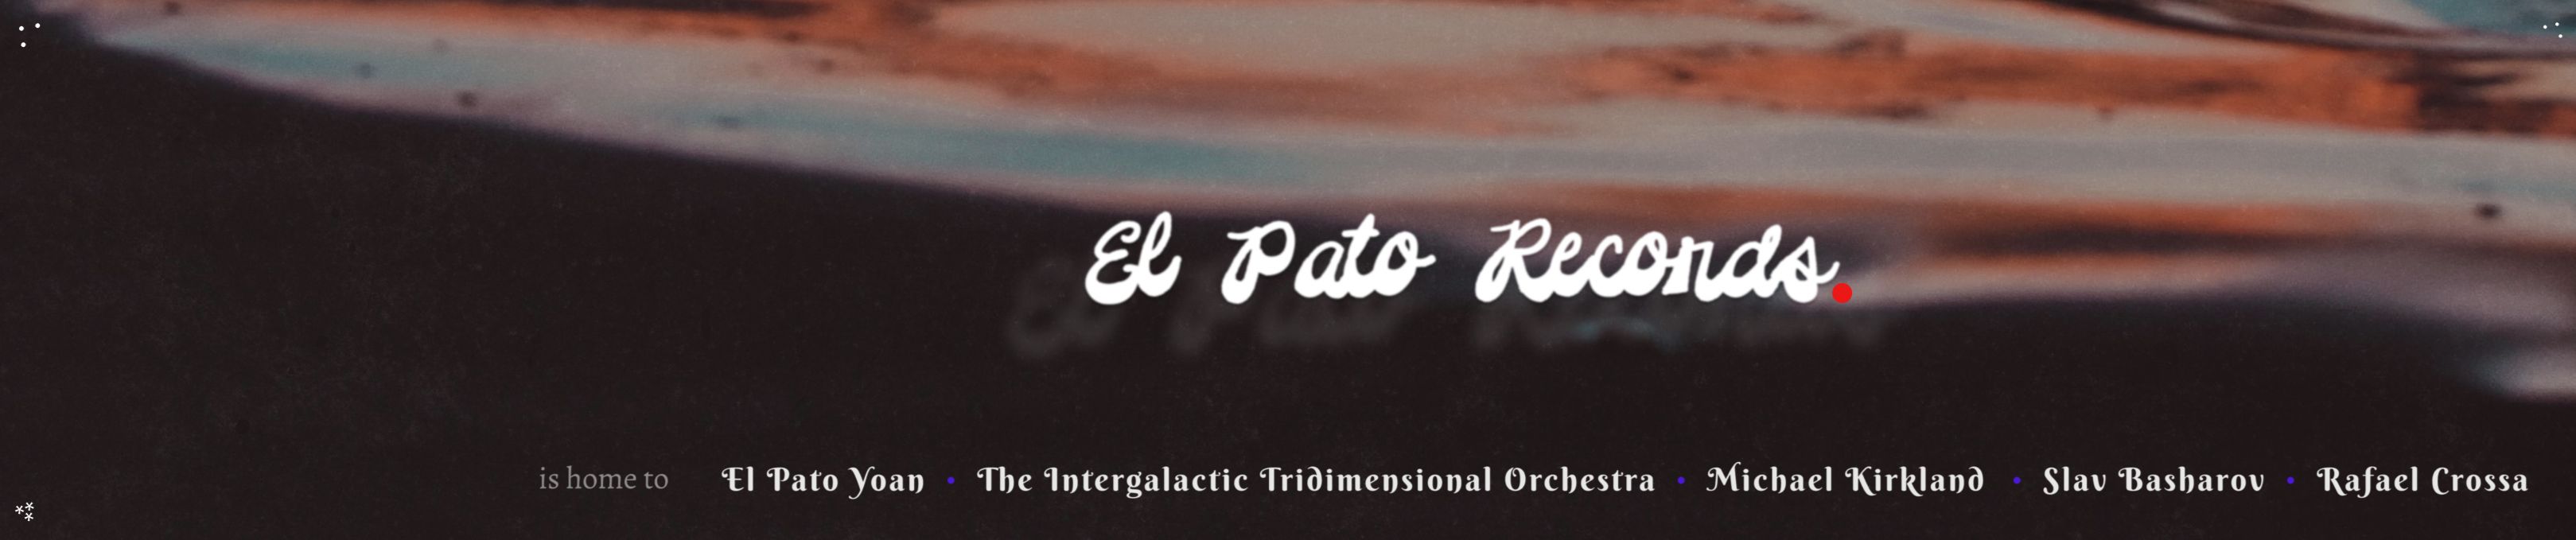 Stream El Pato Records music | Listen to songs, albums, playlists for free  on SoundCloud